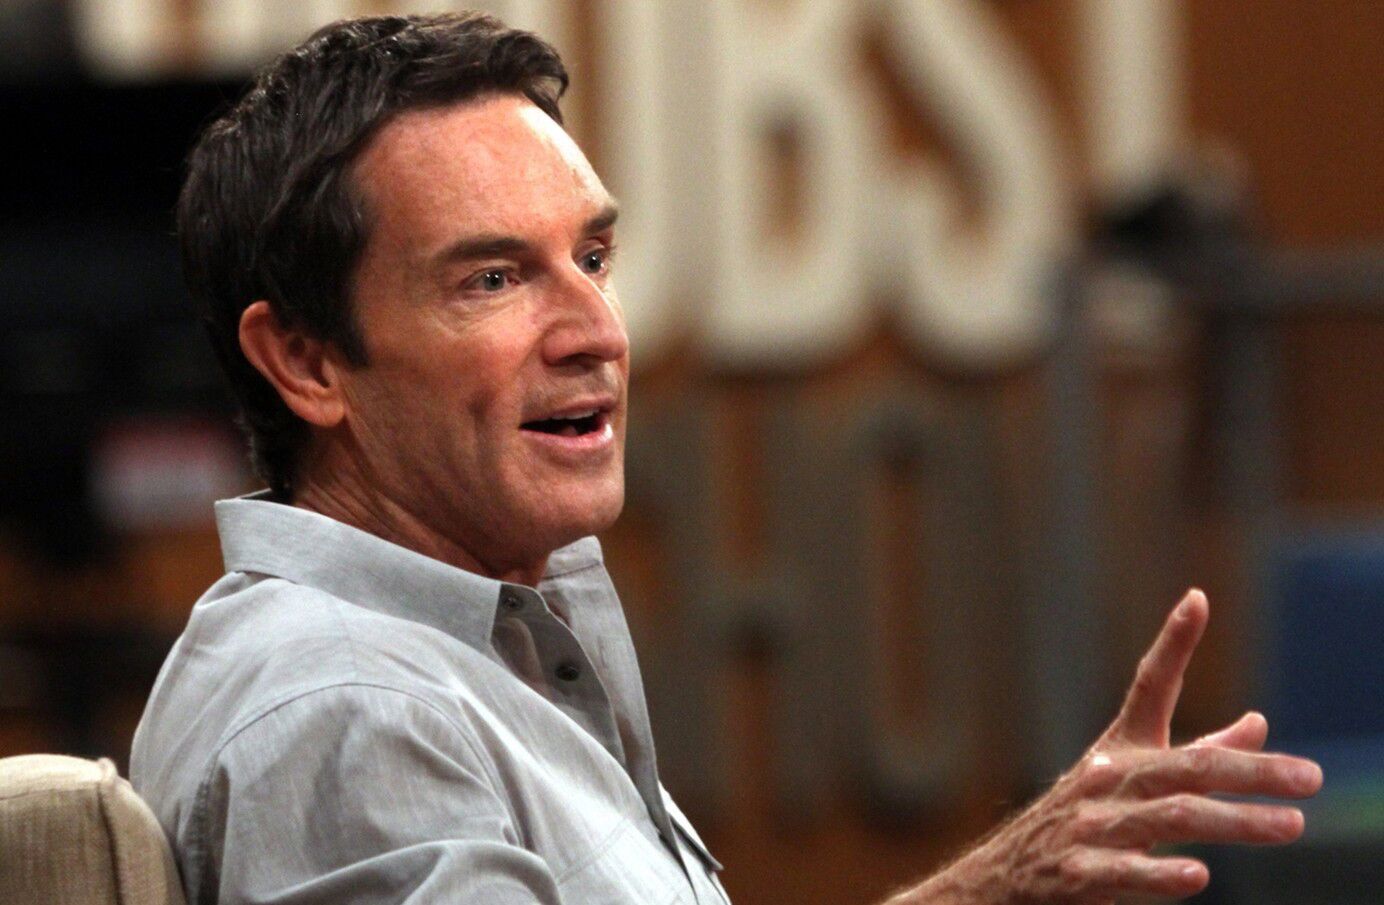 Emmy-winning "Survivor" host Jeff Probst seems to do much better in the wild than in an arm chair. His aim to feature non-celebrities on "The Jeff Probst Show" didn't snag a following — the show lasted for one season.